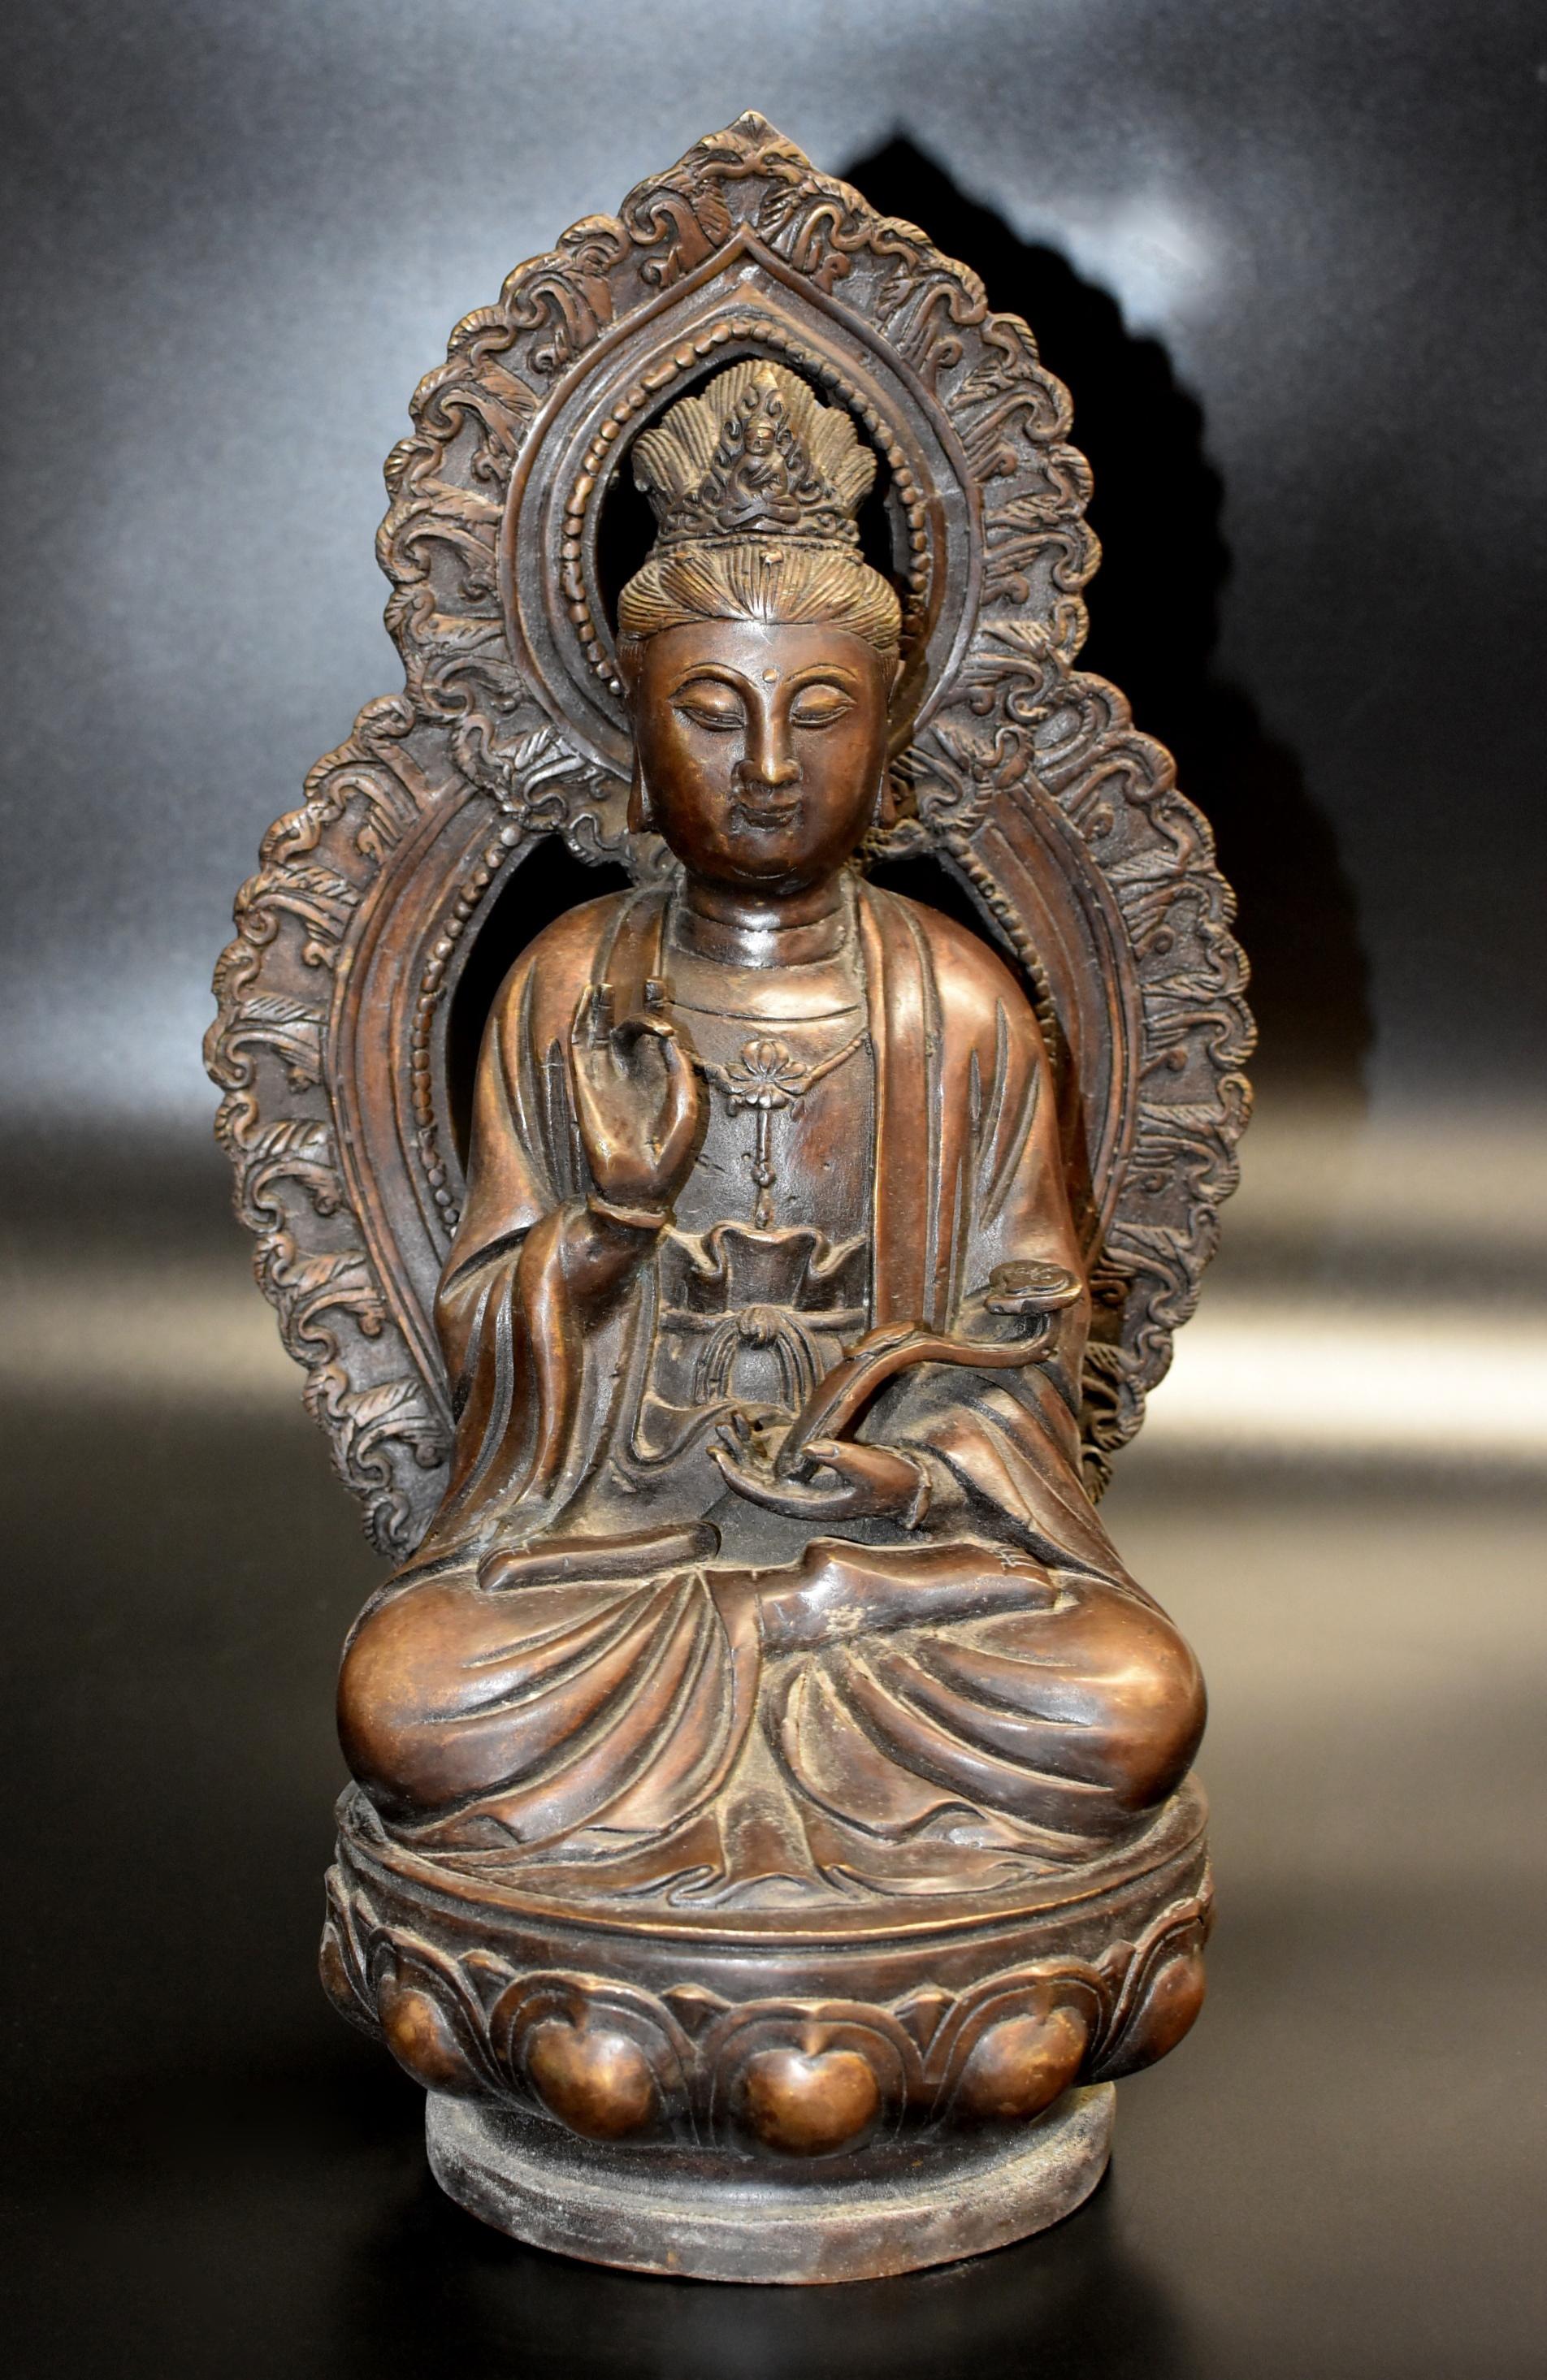 A beautiful bronze Guan Yin, Bodhisattva Avalokiteshvara, Goddess of Great Compassion. Seated on a lotus base against a flame-shaped mandorla, the figure rendered with a serene expression framed by a pair of pendulous earlobes, with downcast eyes